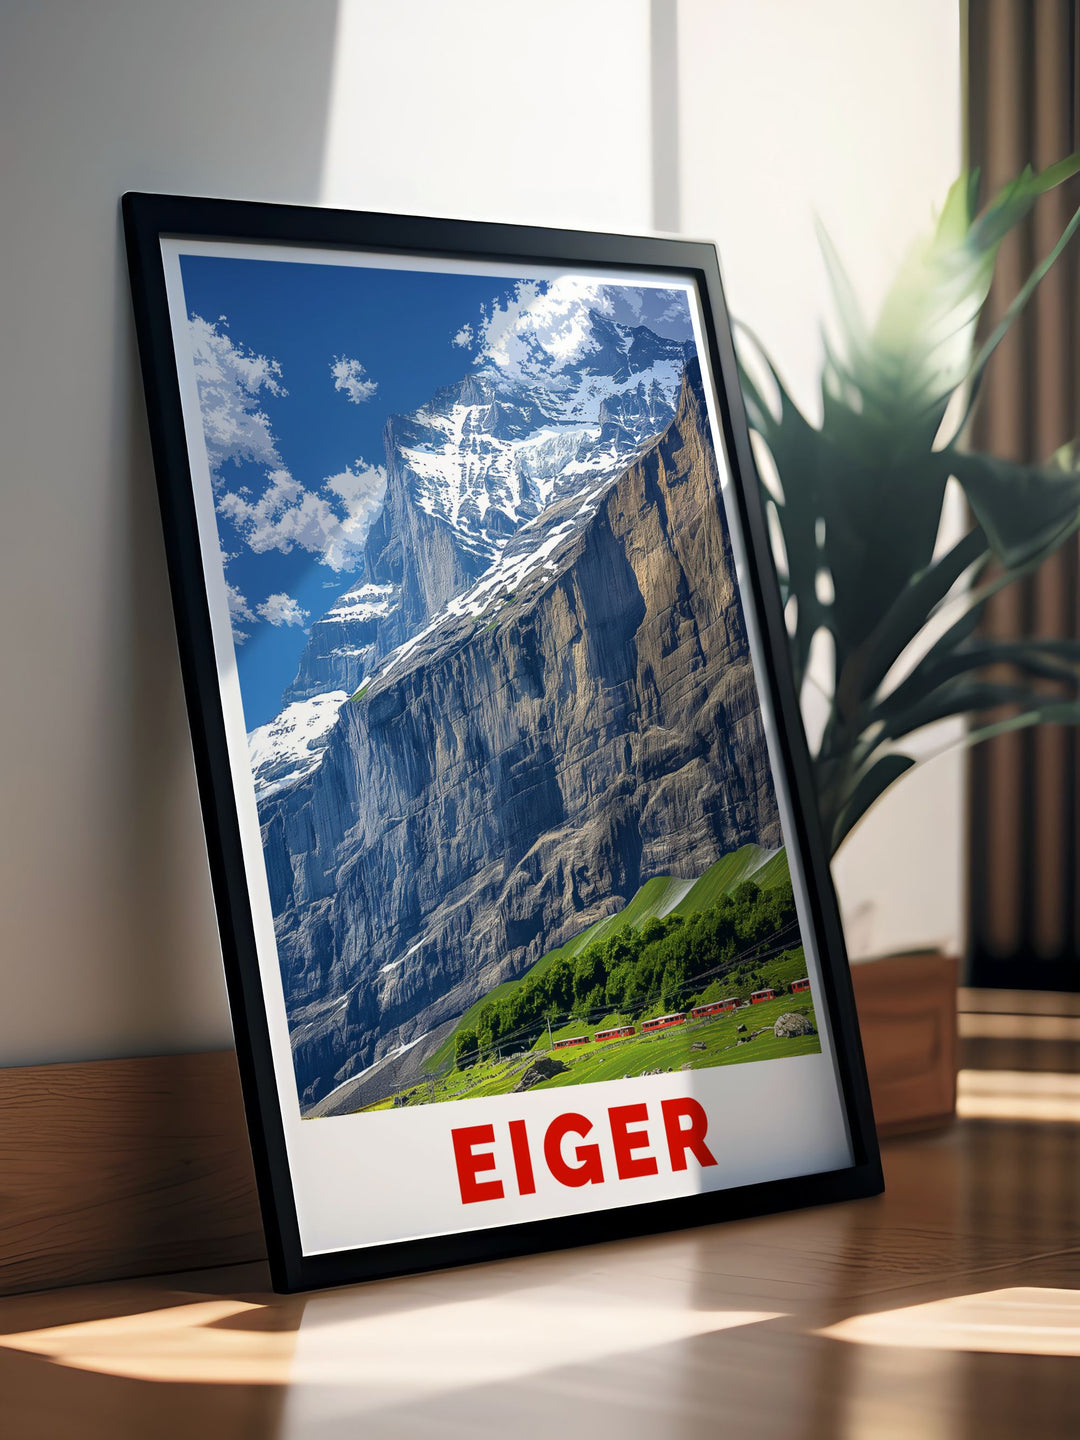 Eiger wall art featuring the breathtaking views of Jungfrau Switzerland and the surrounding alpine scenery a beautiful addition to any home decor bringing the majesty of the Swiss Alps into your living space.